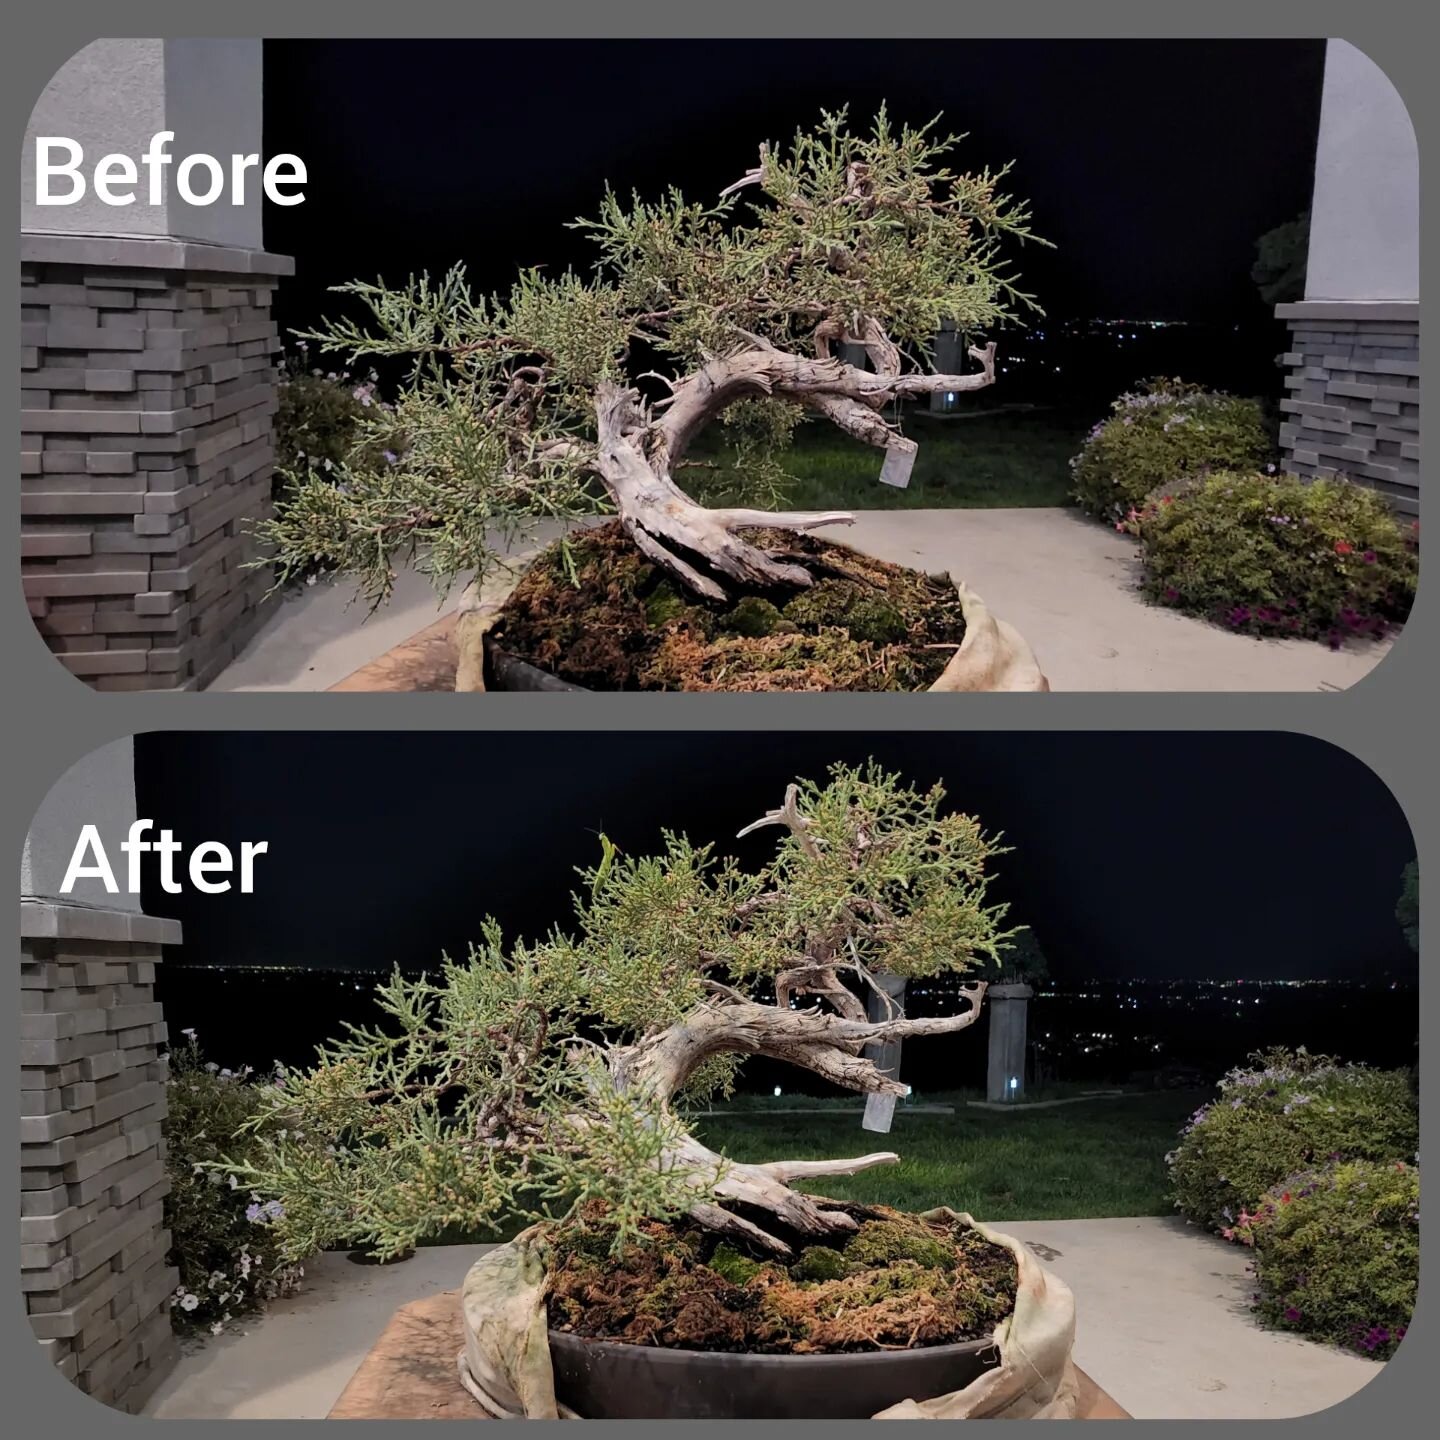 Before and after touchup work.
Yes, the mantis hung out while I worked. www.HighDesertBonsai.com